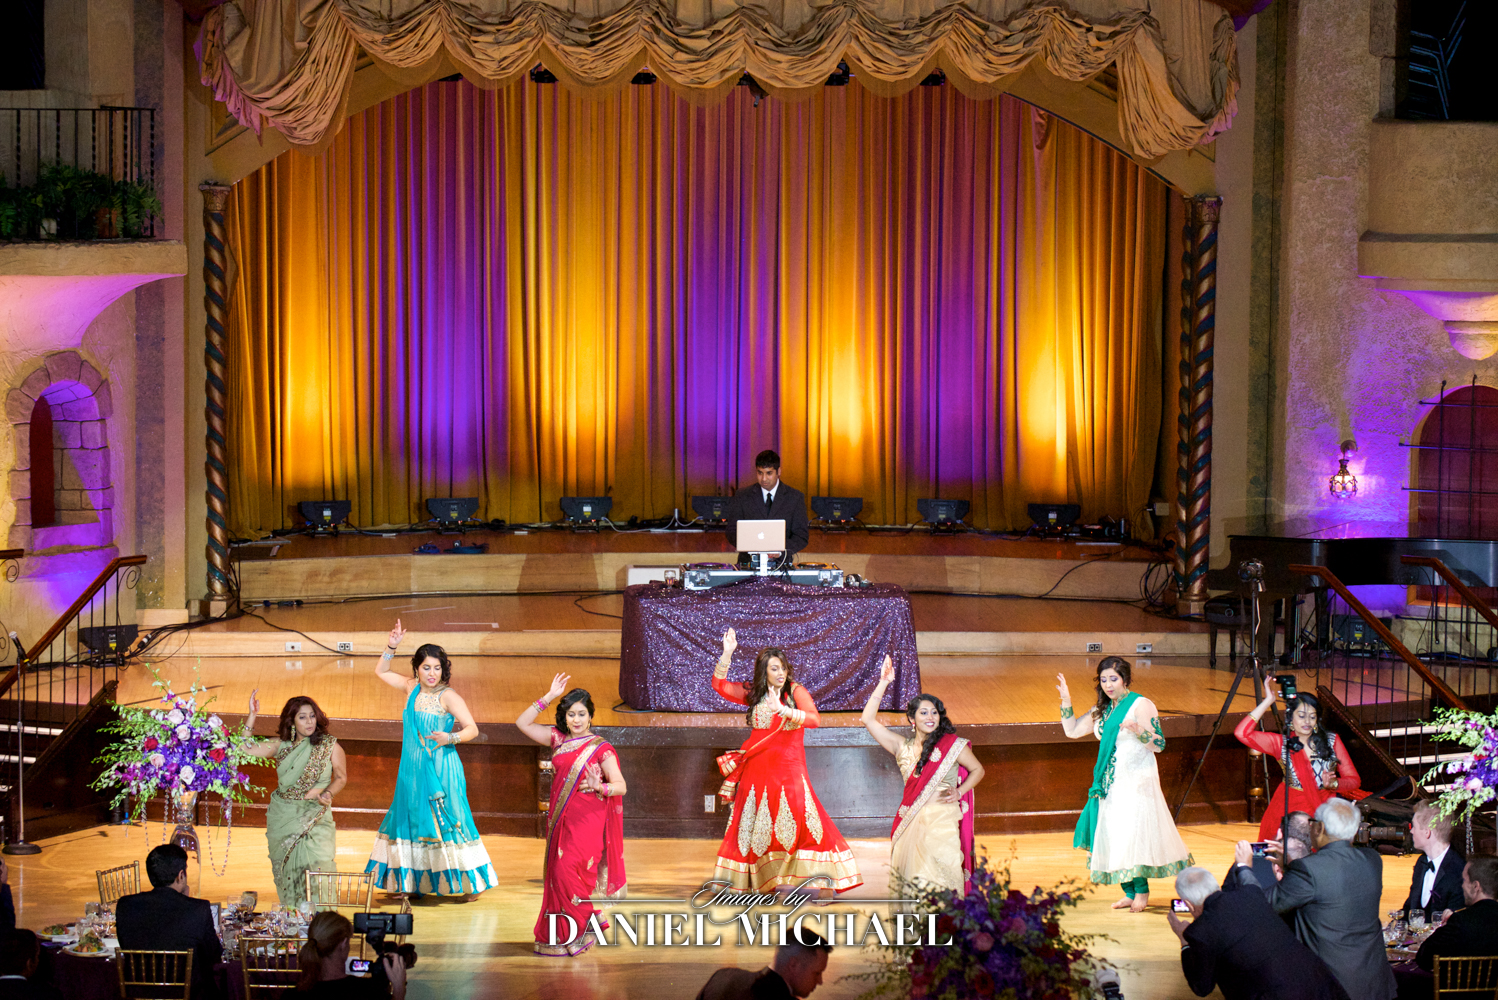 Energetic South Asian group dance at a Cincinnati wedding, showcasing cultural attire and festive atmosphere at Indiana Roof Ballroom